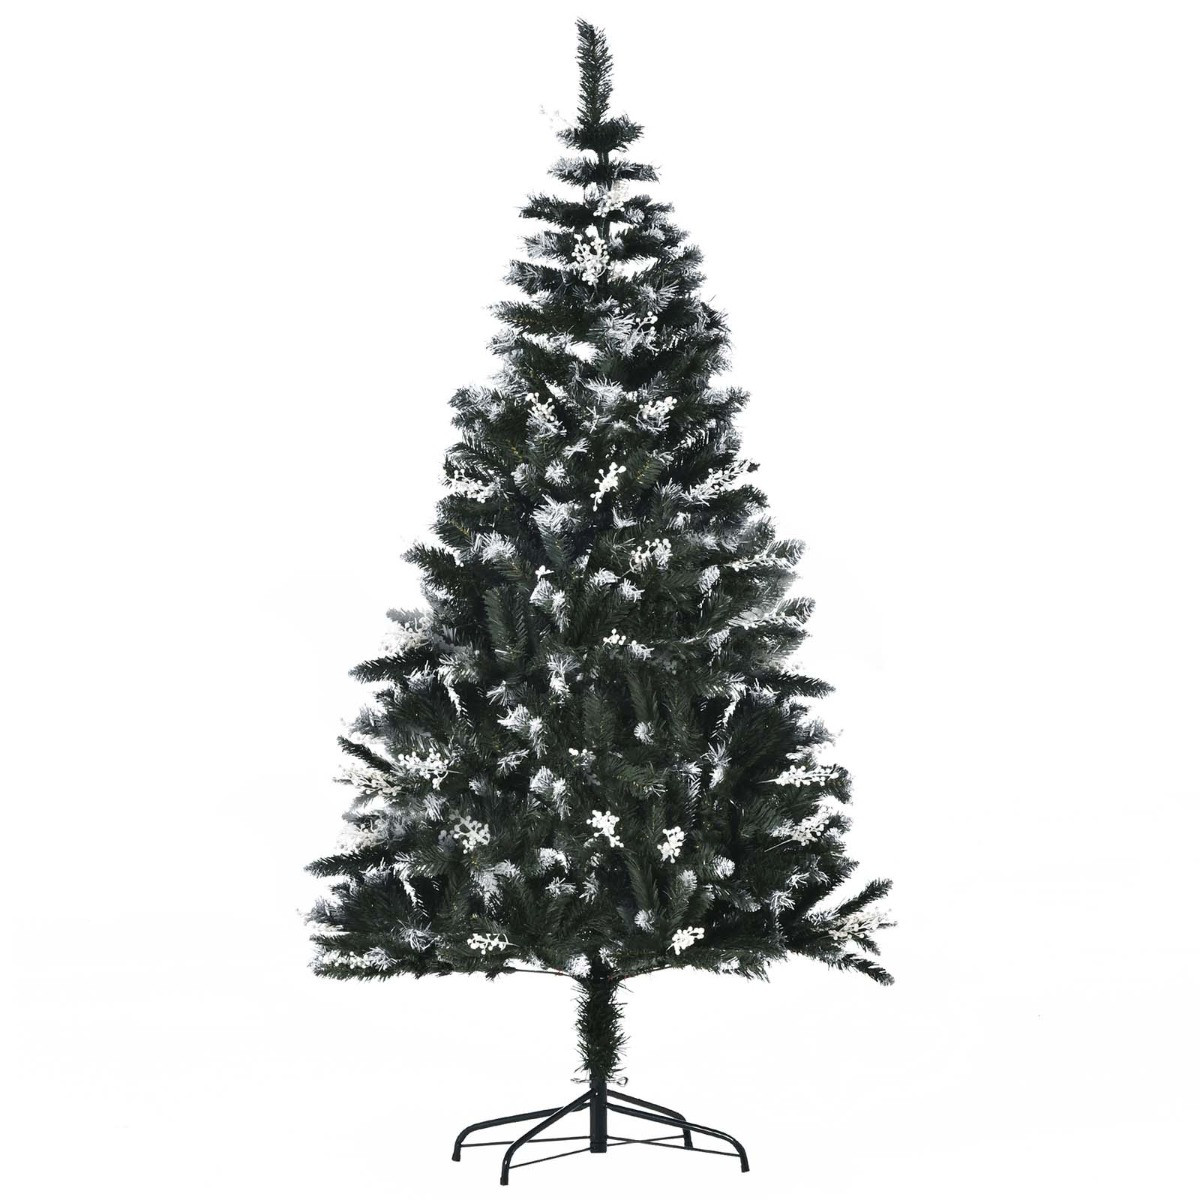 OHS Artificial Snow Dipped Christmas Tree, Dark Green - 6ft>